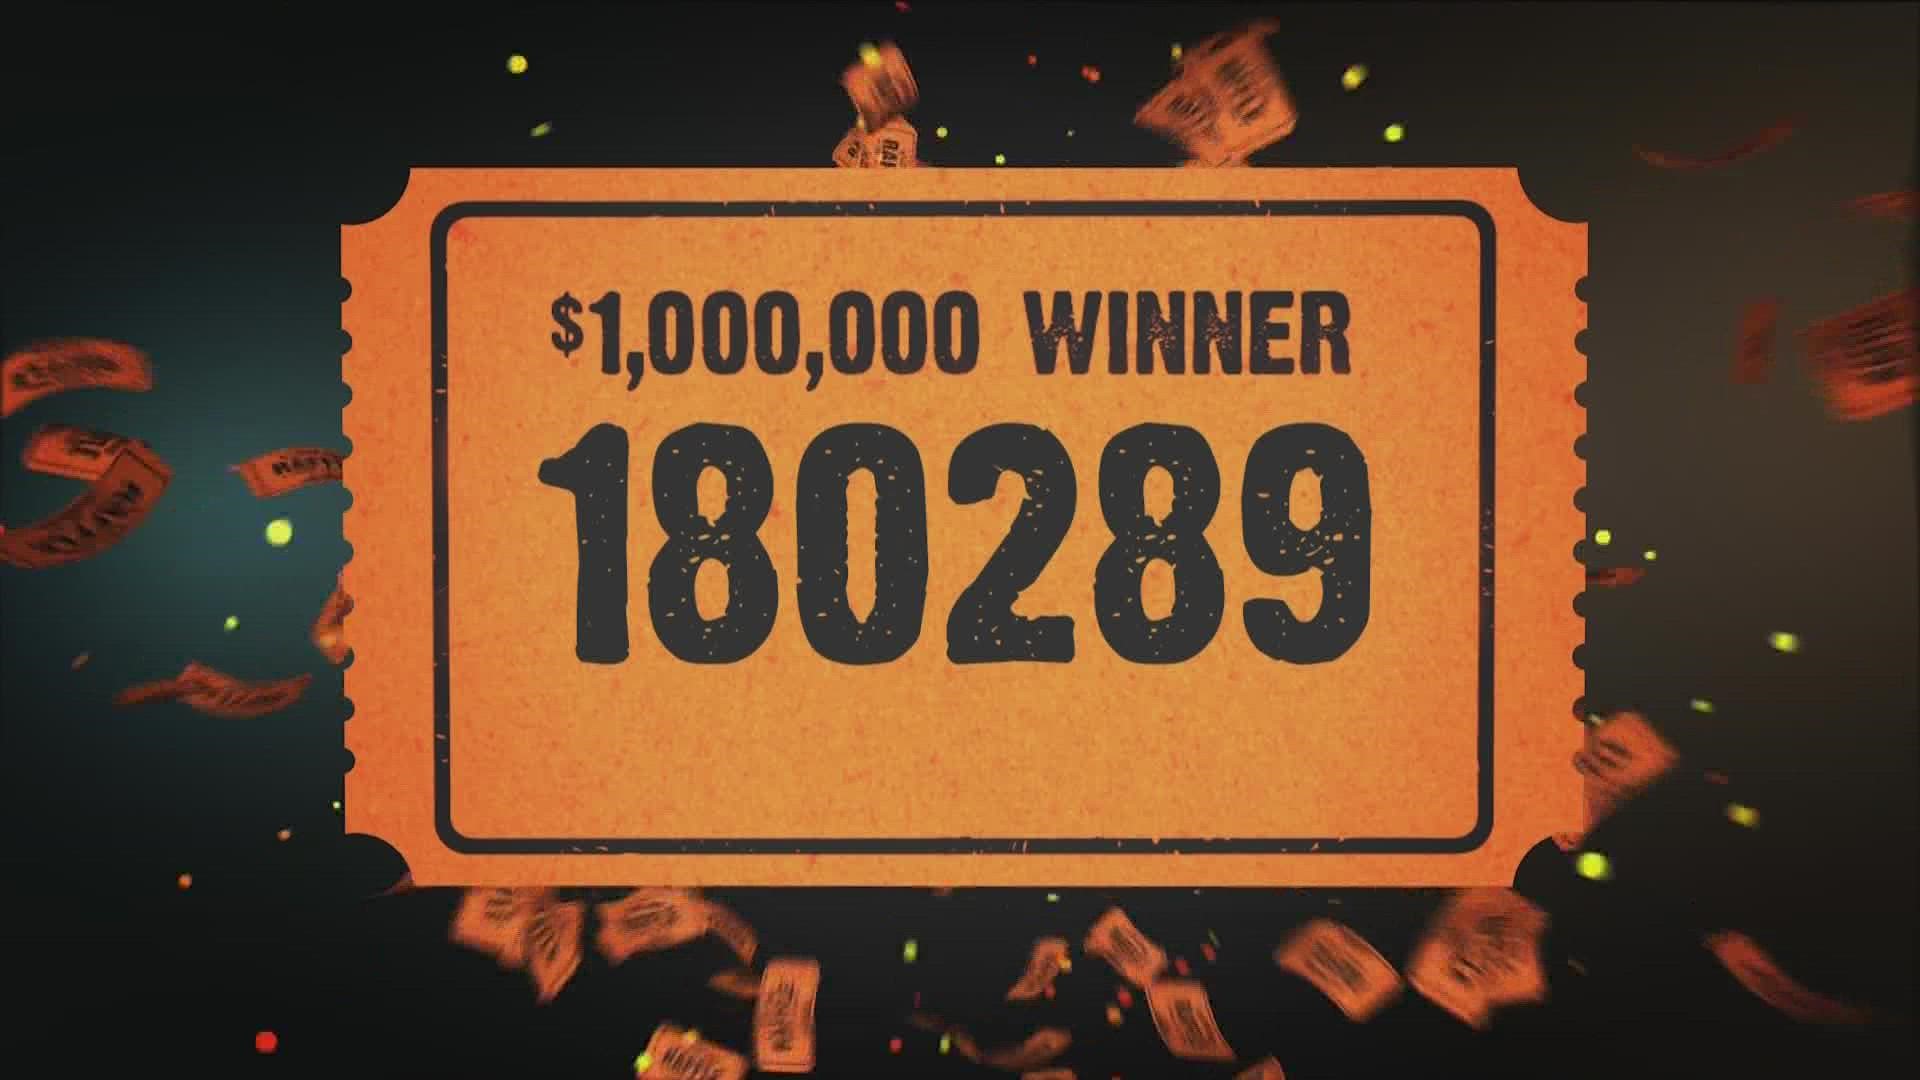 If you didn't win the $1 million grand prize, don't throw out your ticket without checking. There are other prizes ranging from $15 to $10,000.